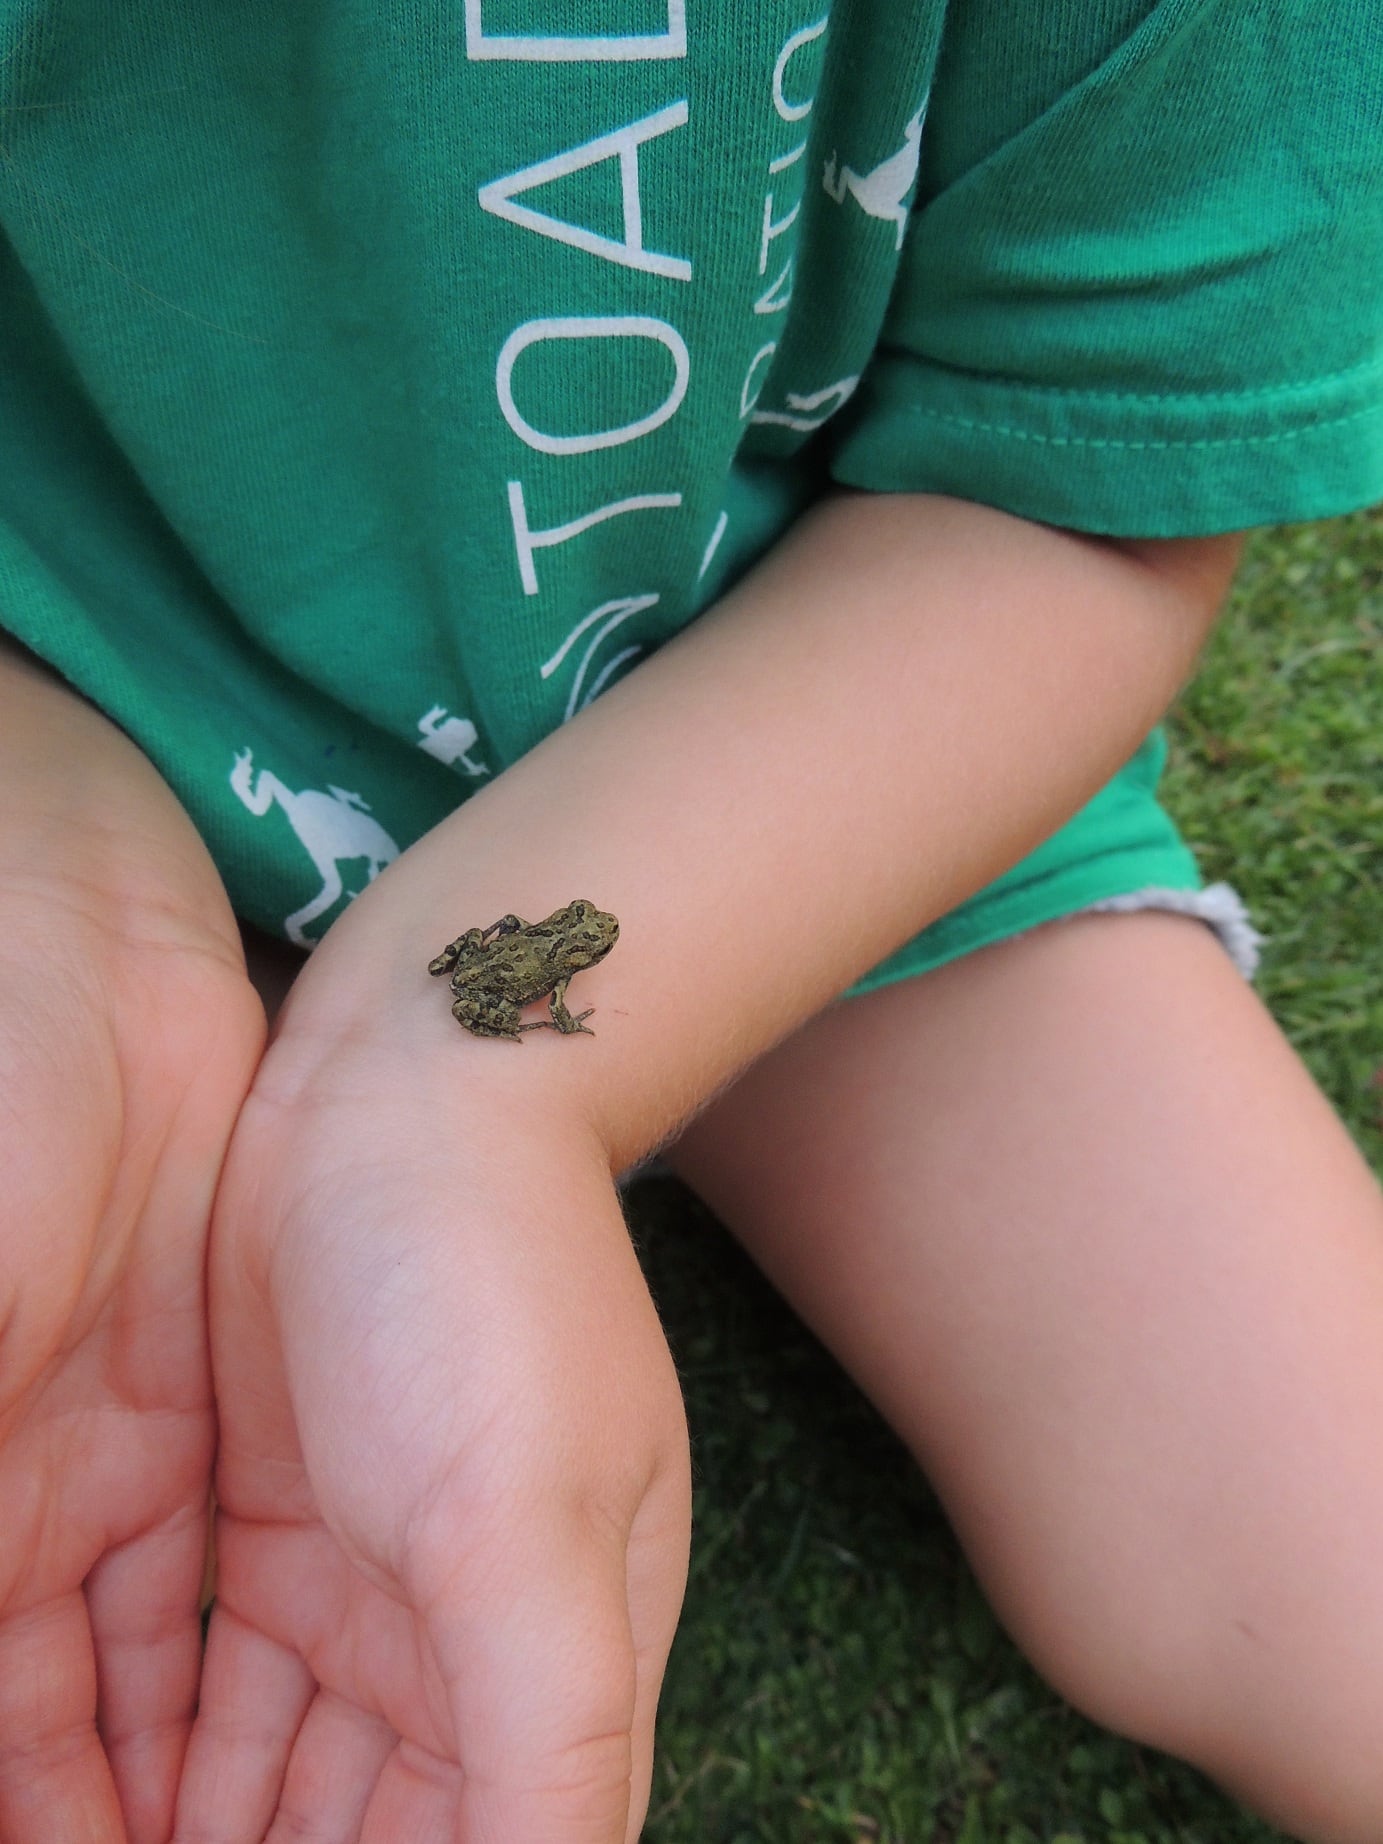 Free family fun/education at Annual Toadfest